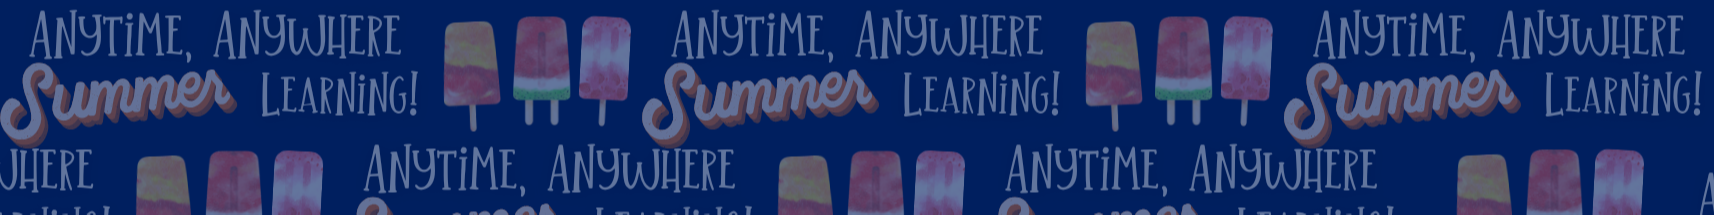 Admit One: Anytime, Anywhere Summer Learning!